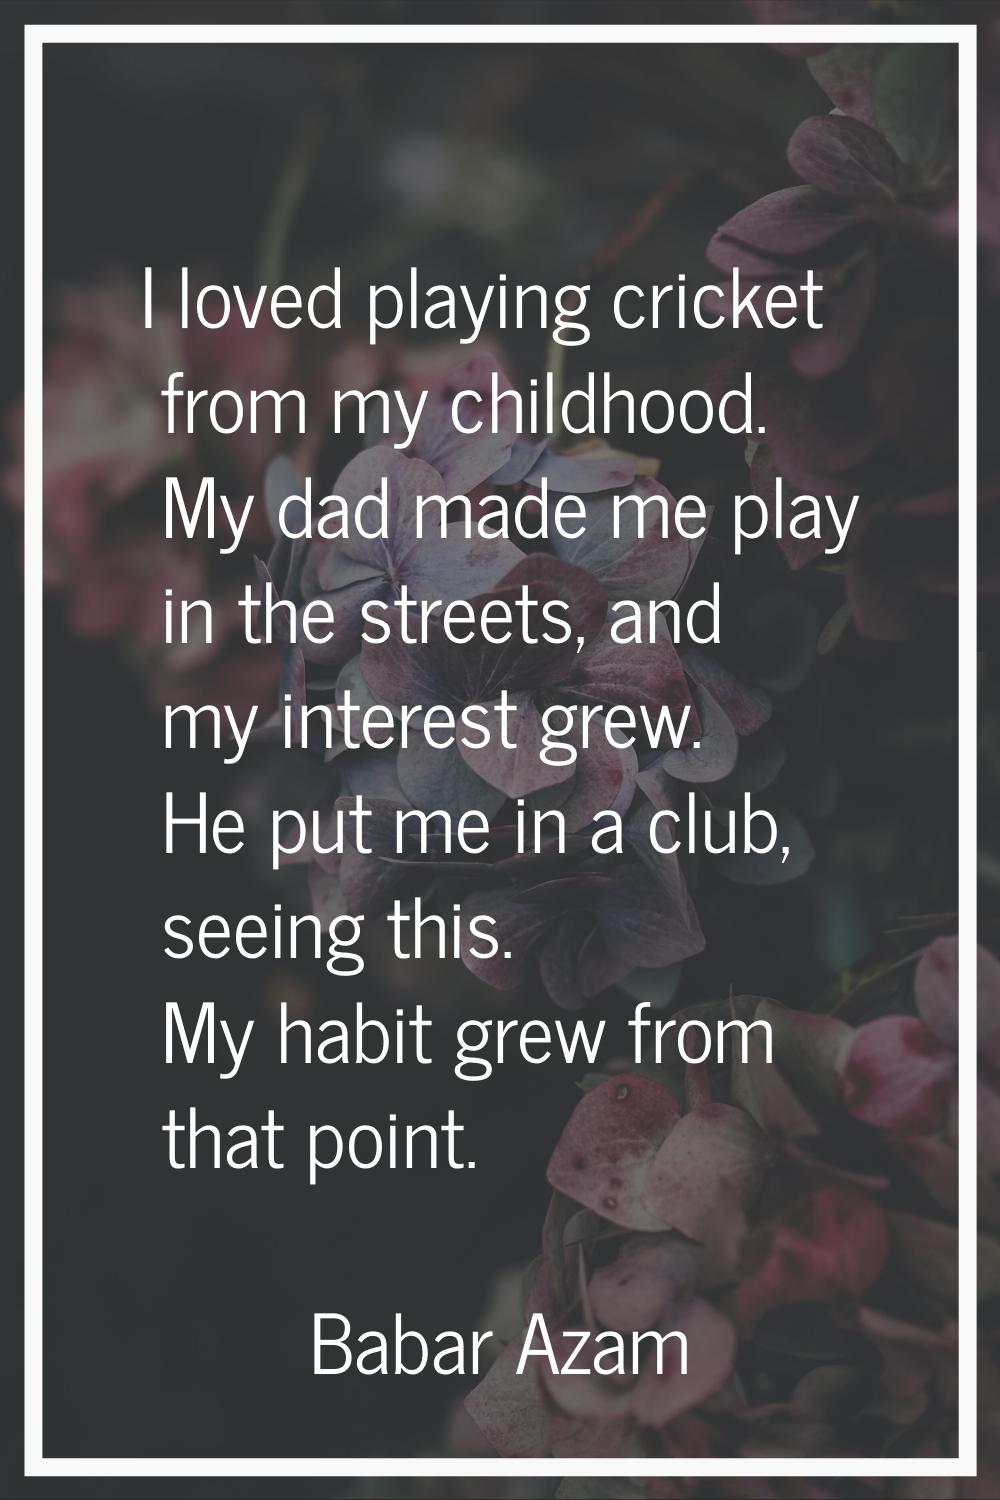 I loved playing cricket from my childhood. My dad made me play in the streets, and my interest grew